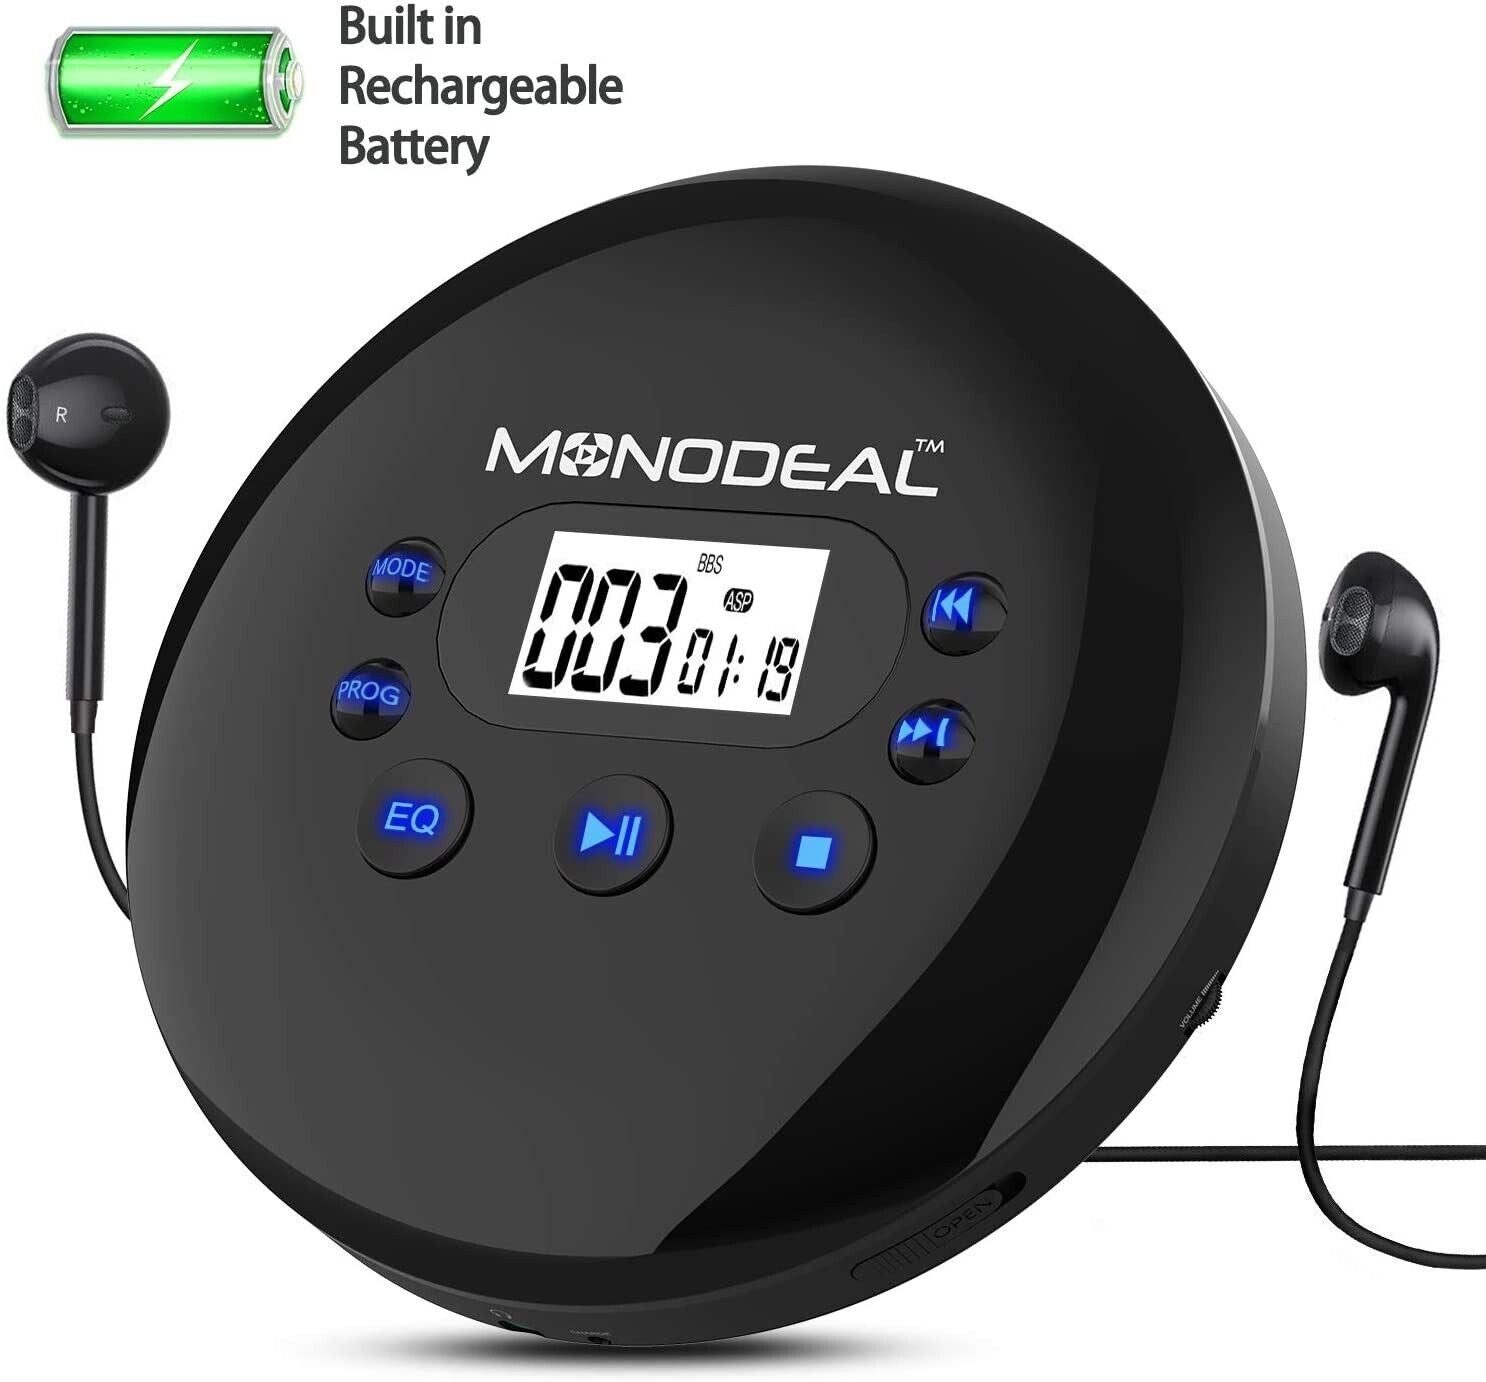 MONODEAL Portable Rechargeable Personal Compact Disc CD Player MD-102